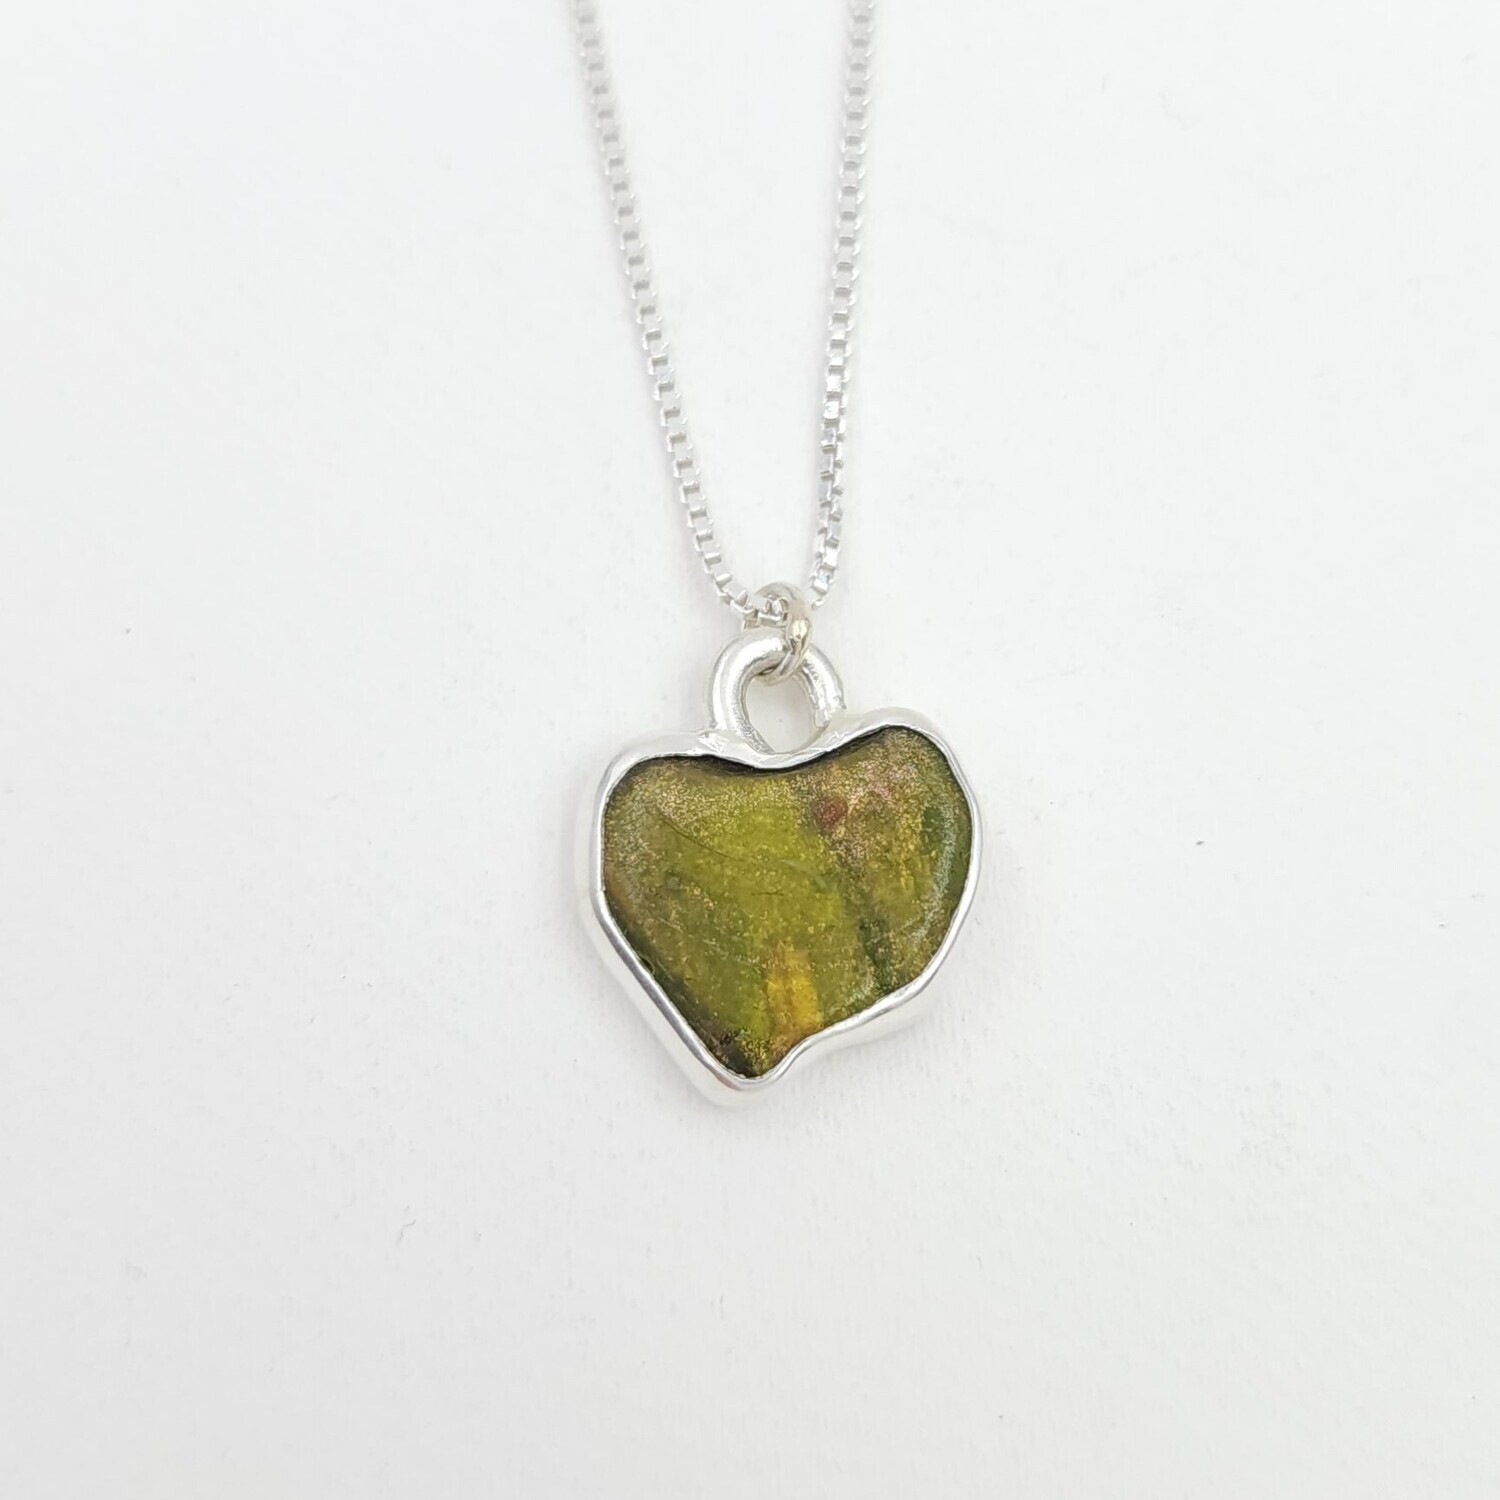 Double Sided Lake Erie Beach Tile Heart Necklace in Sterling Silver